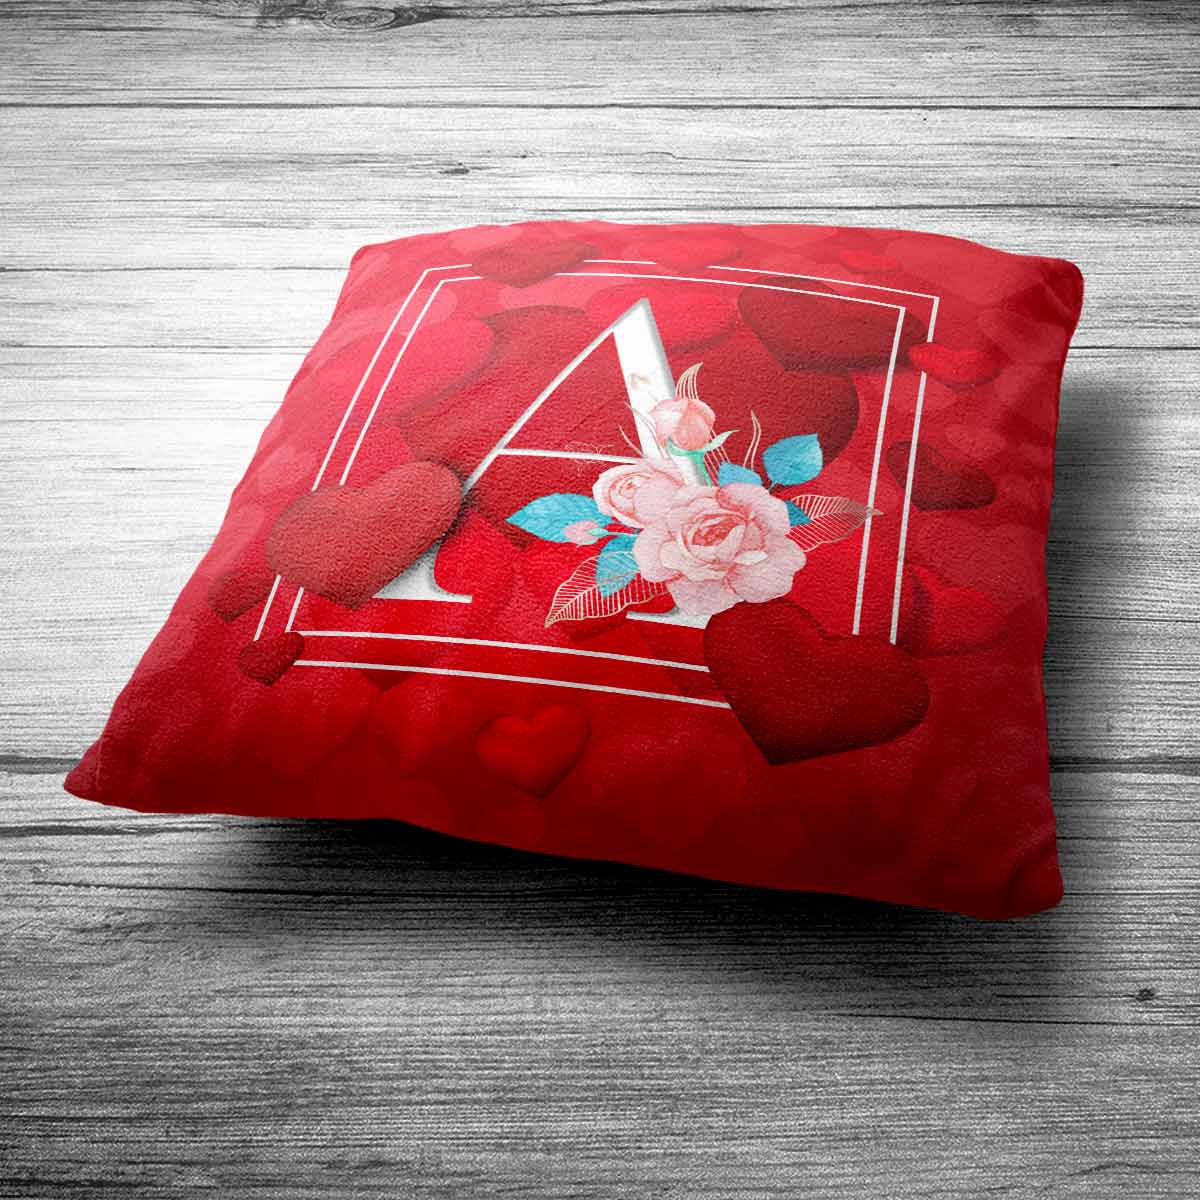 Personalised Love Initial Cushion - Red